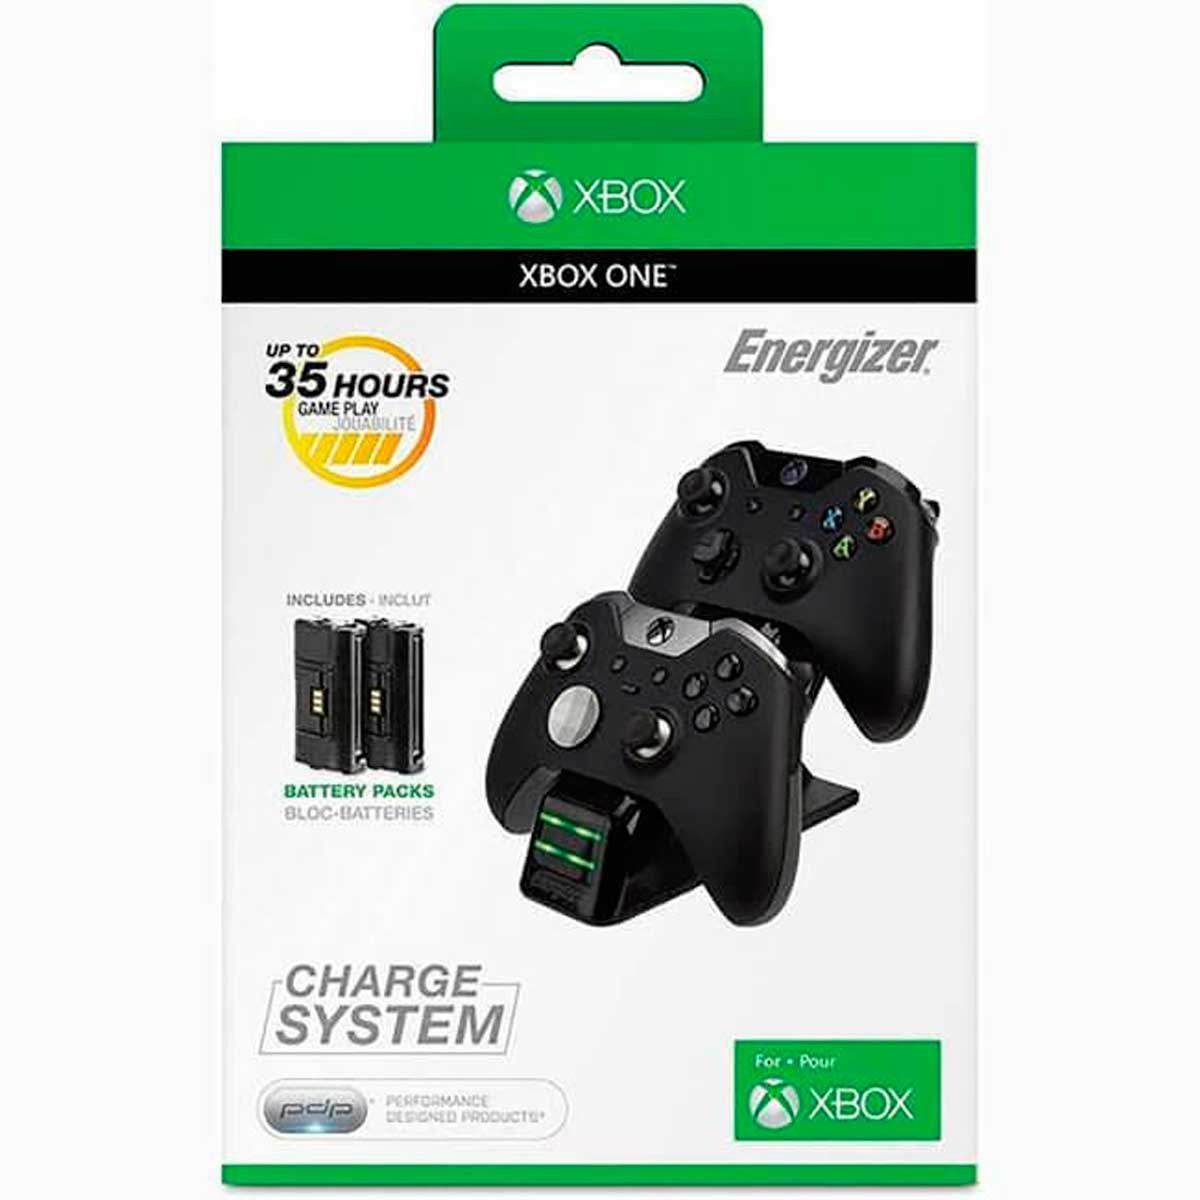 Xbox One Energizer 2X Charging System